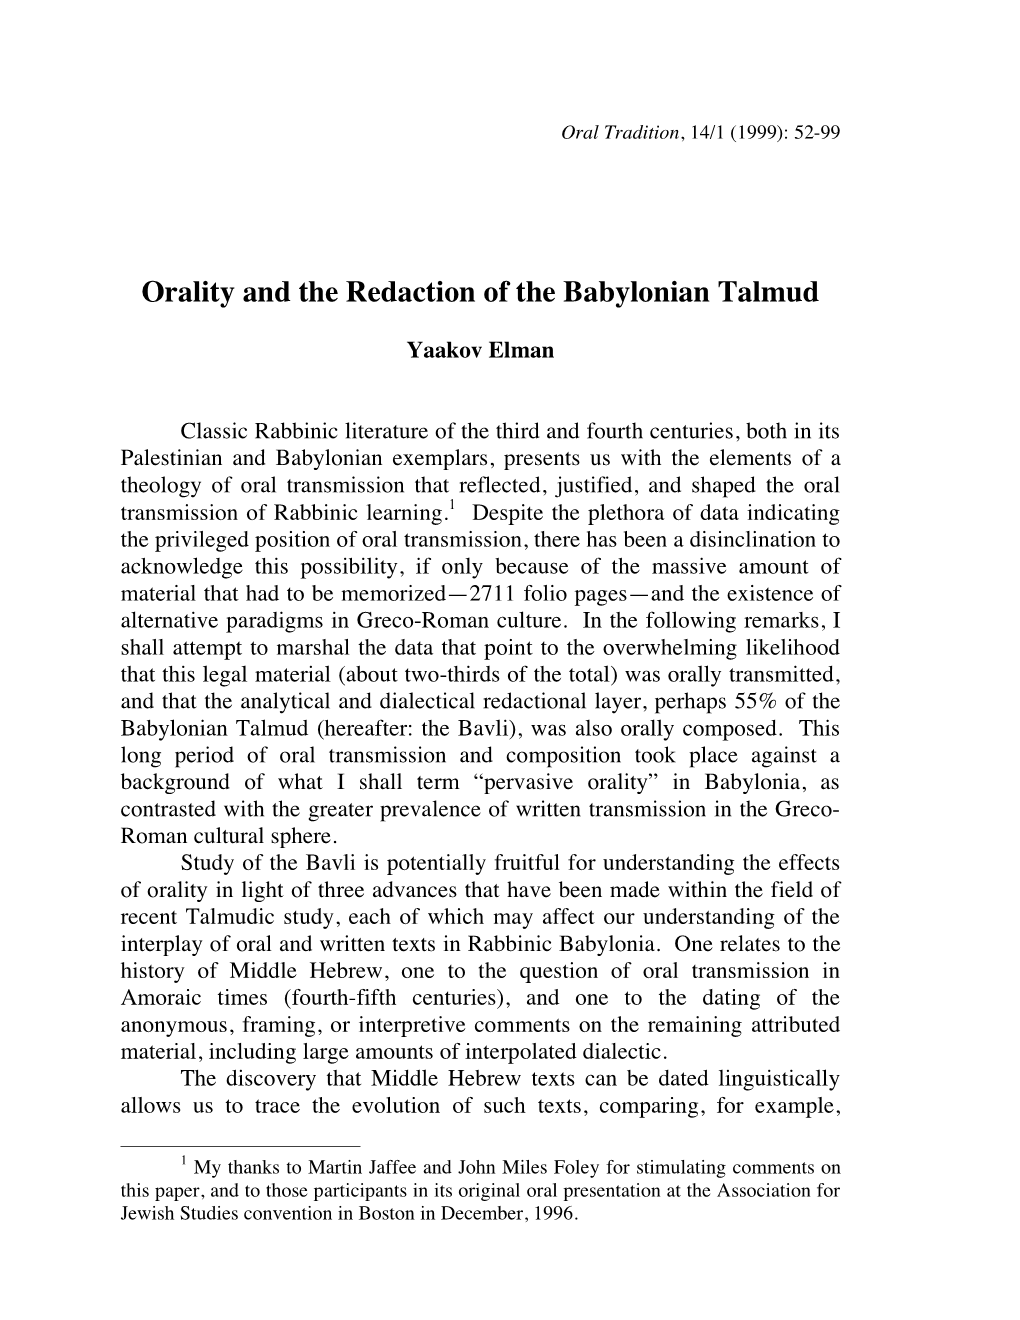 Orality and the Redaction of the Babylonian Talmud